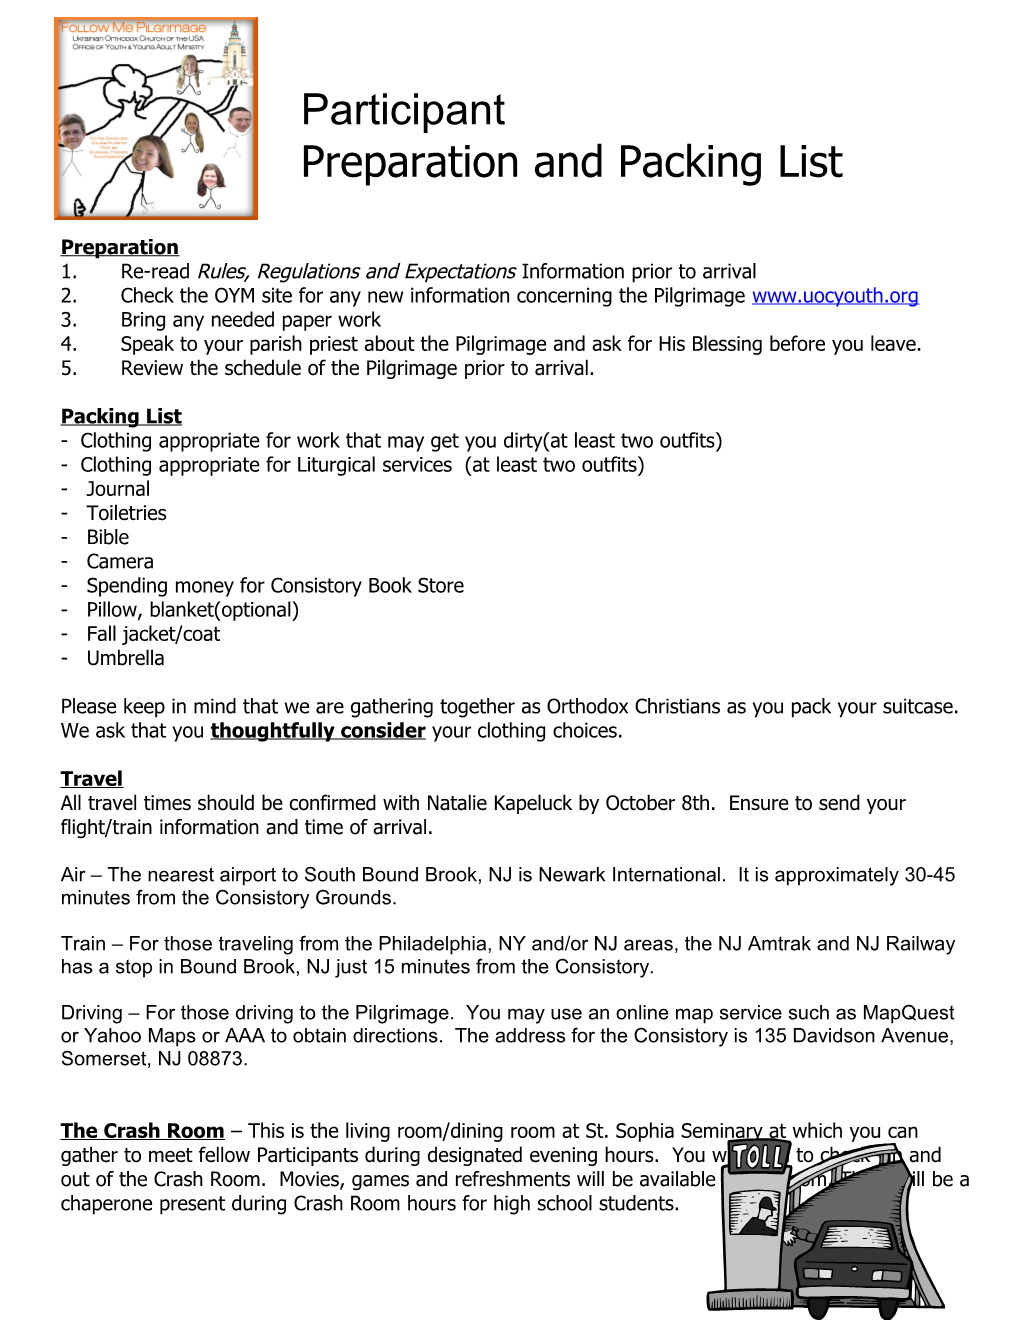 Preparation and Packing List